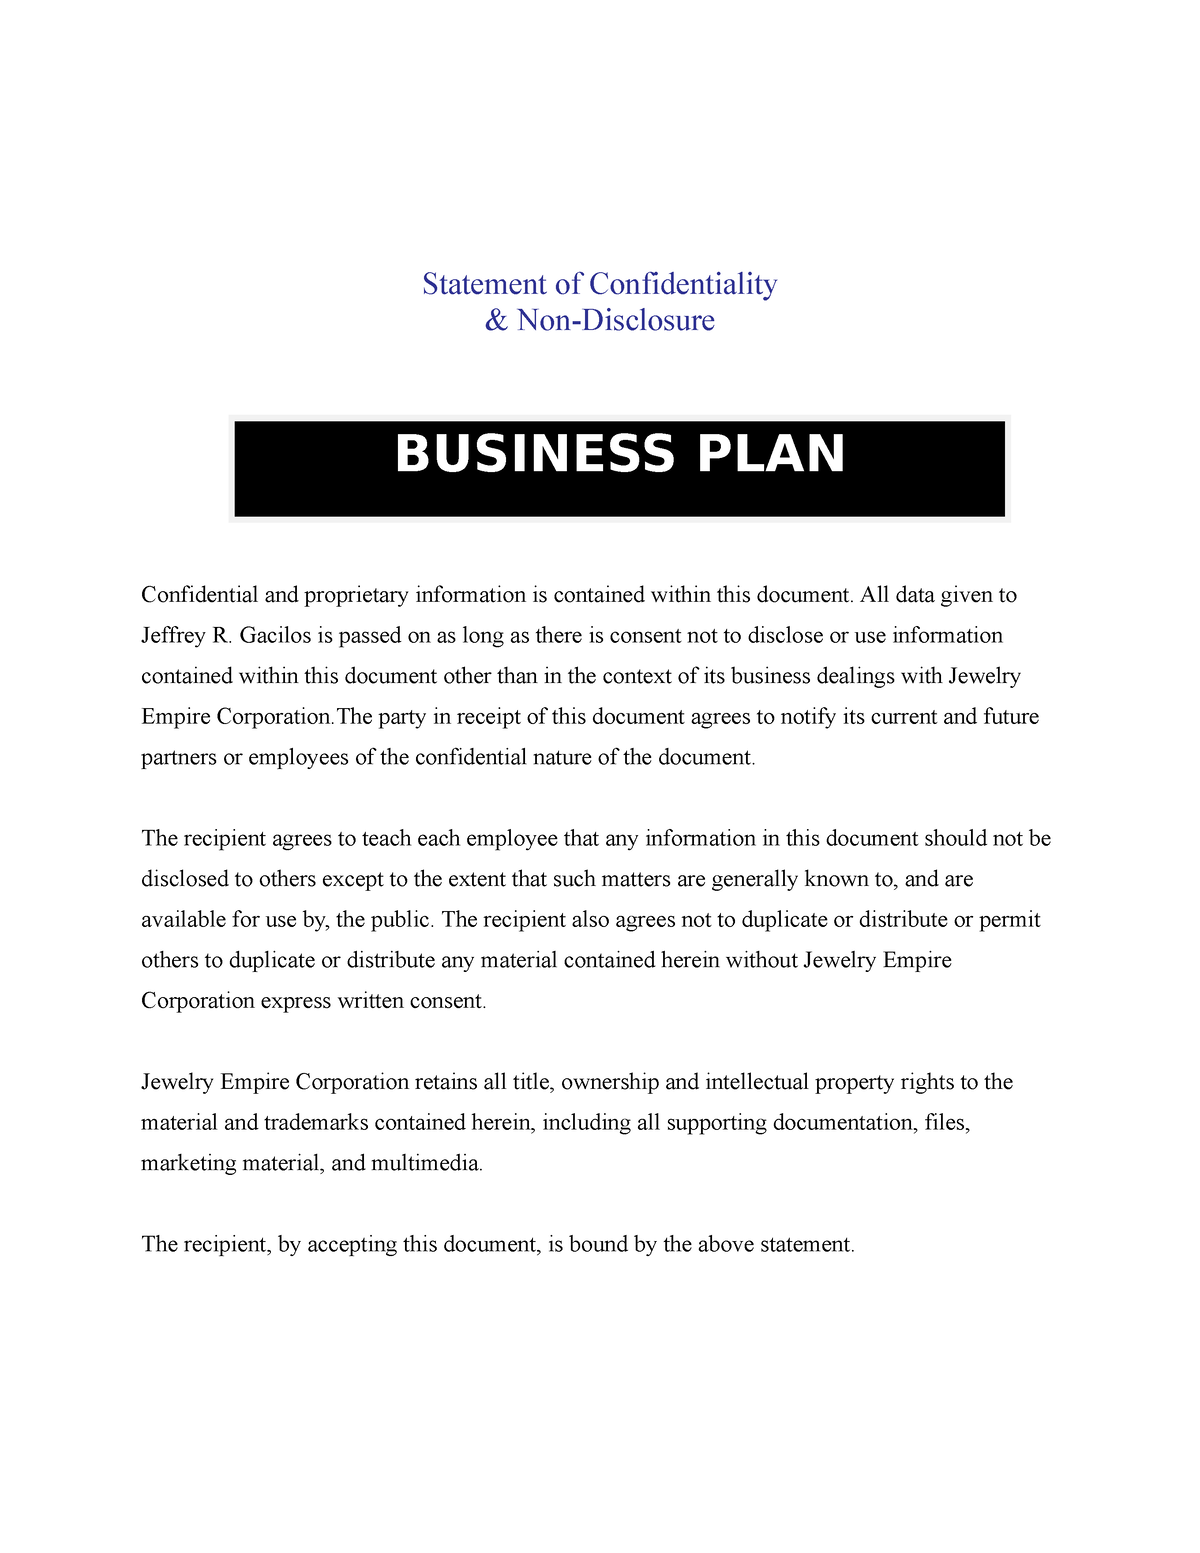 statement of confidentiality business plan